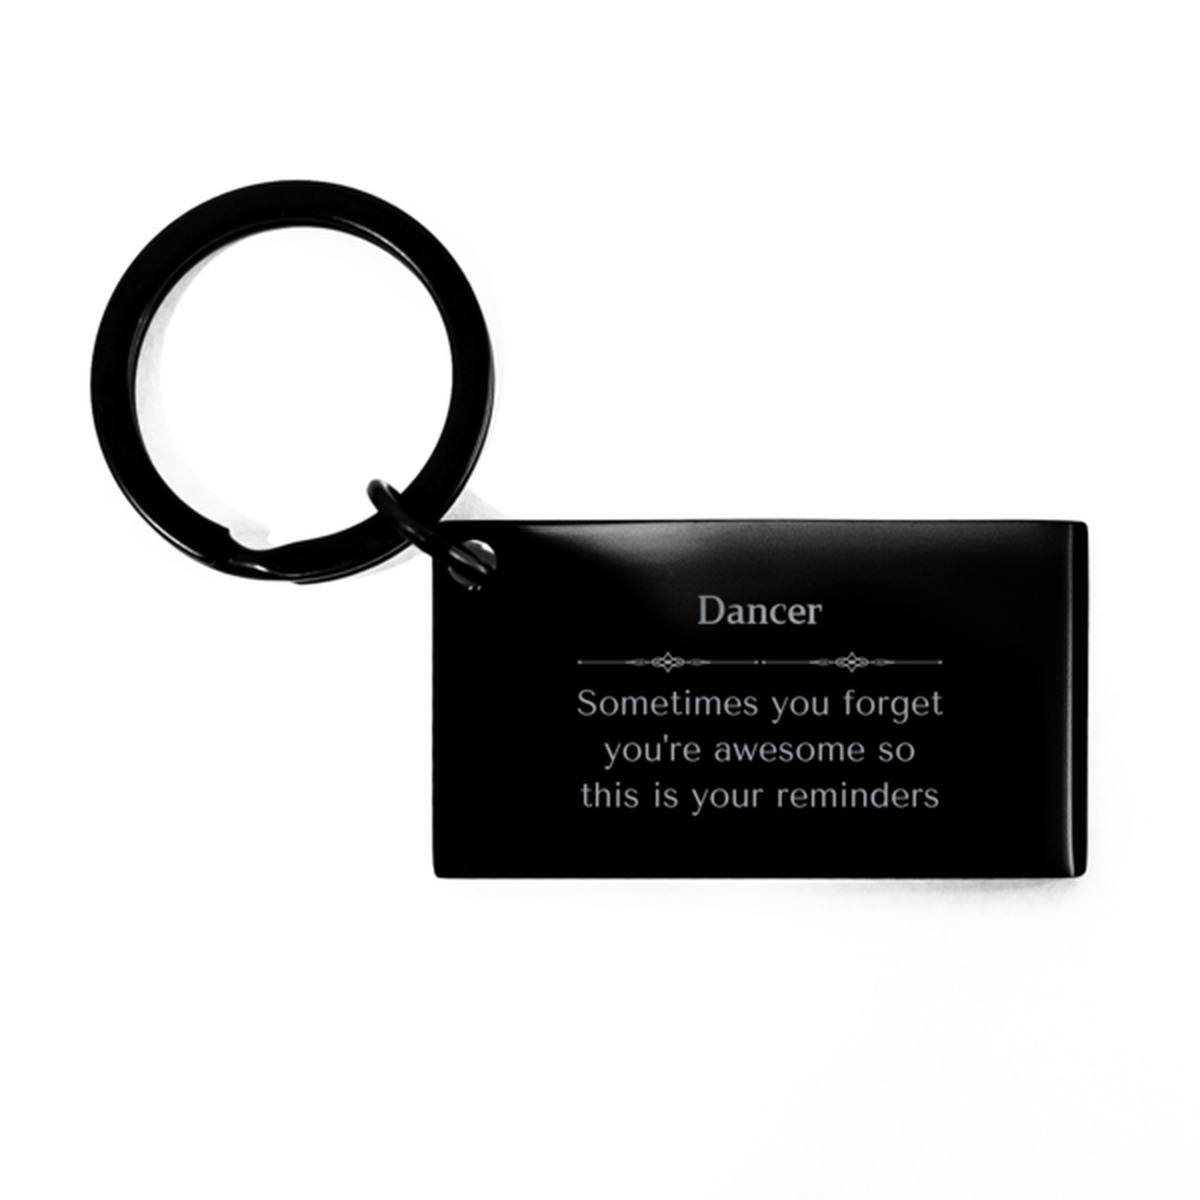 Sentimental Dancer Keychain, Forester Sometimes you forget you're awesome so this is your reminders, Graduation Christmas Birthday Gifts for Dancer, Men, Women, Coworkers